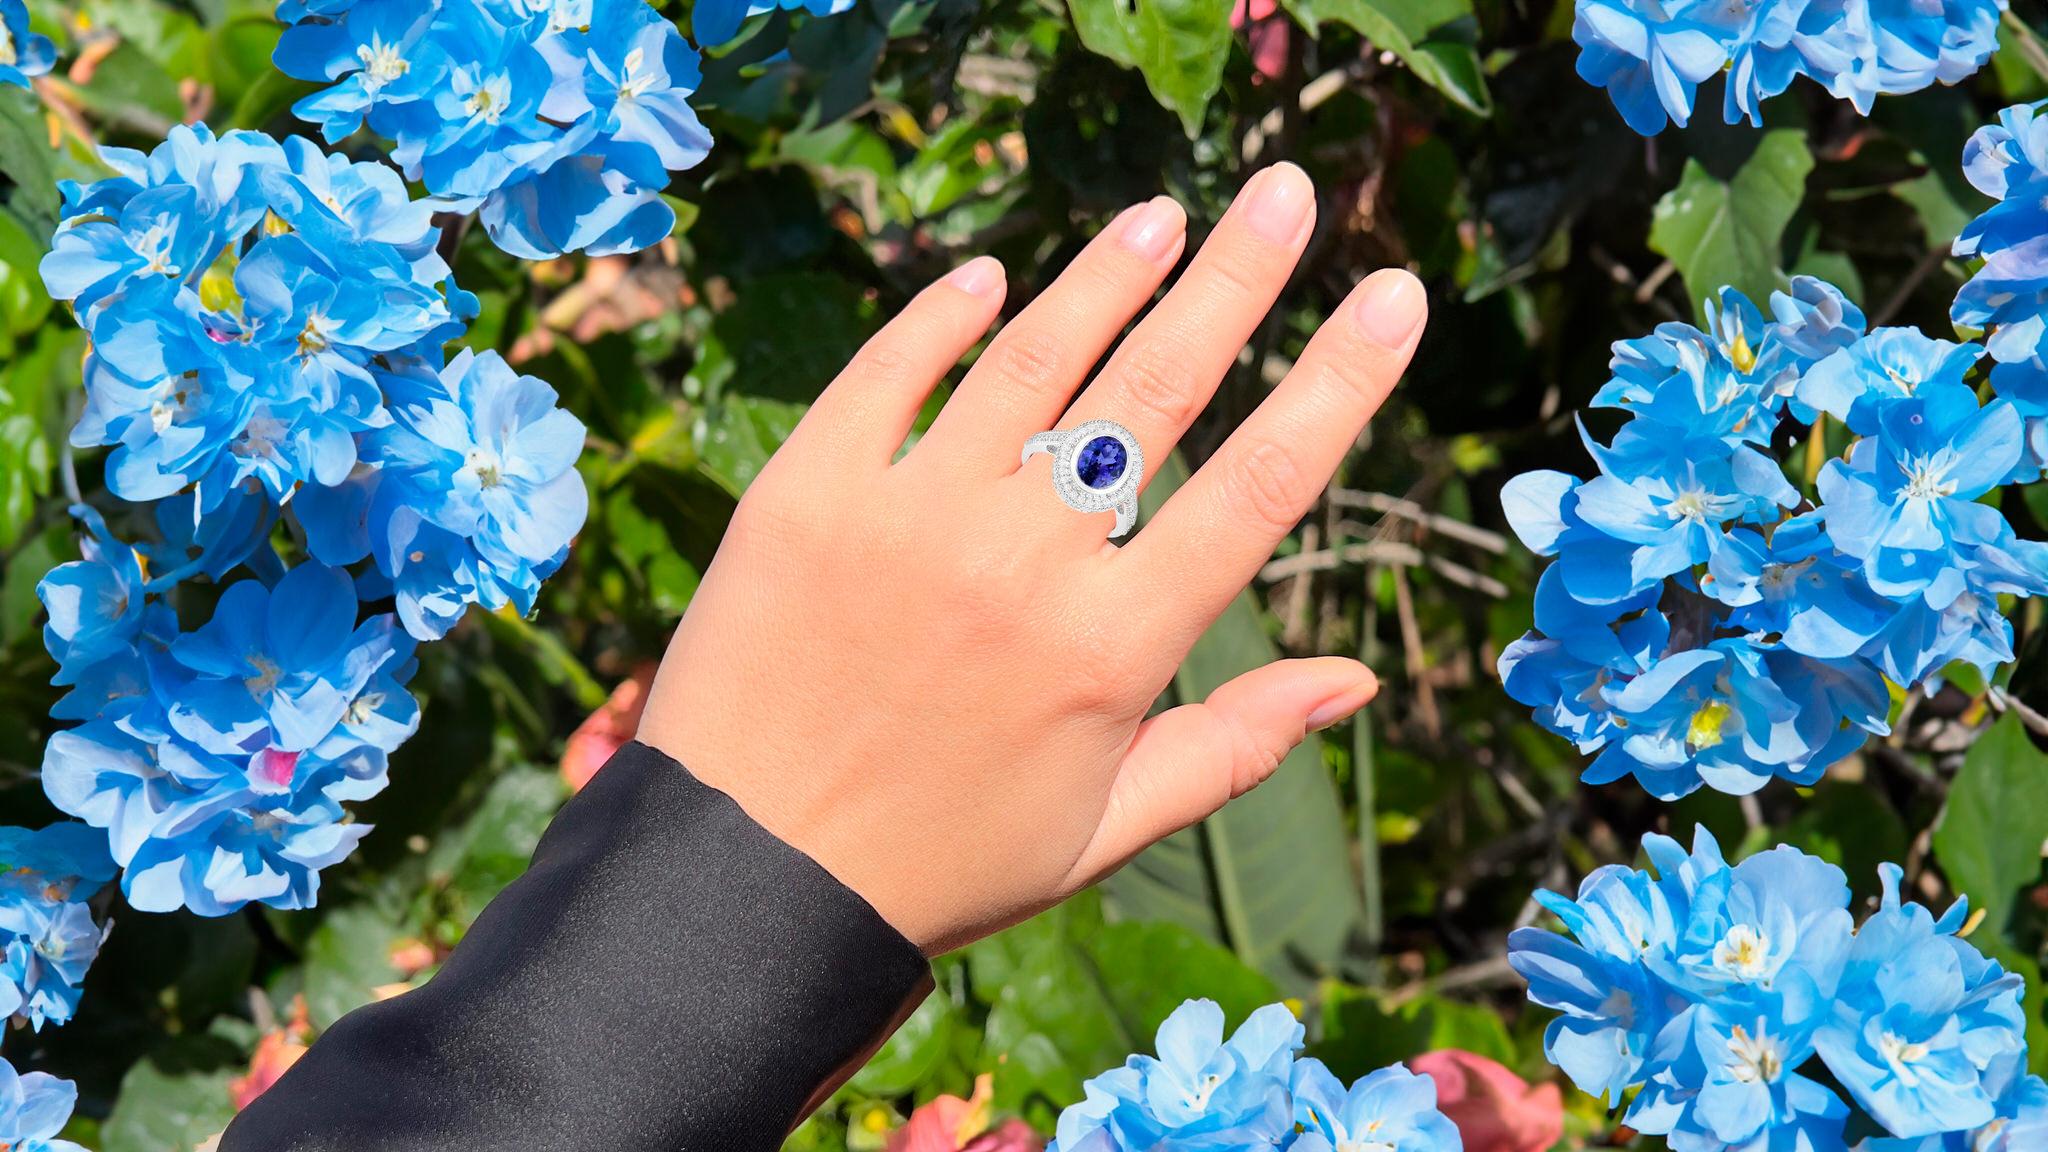 It comes with the Gemological Appraisal by GIA GG/AJP
All Gemstones are Natural
Tanzanite = 2.60 Carat
42 Diamonds = 0.34 Carats
Metal: 14K White Gold
Ring Size: 7* US
*It can be resized complimentary
